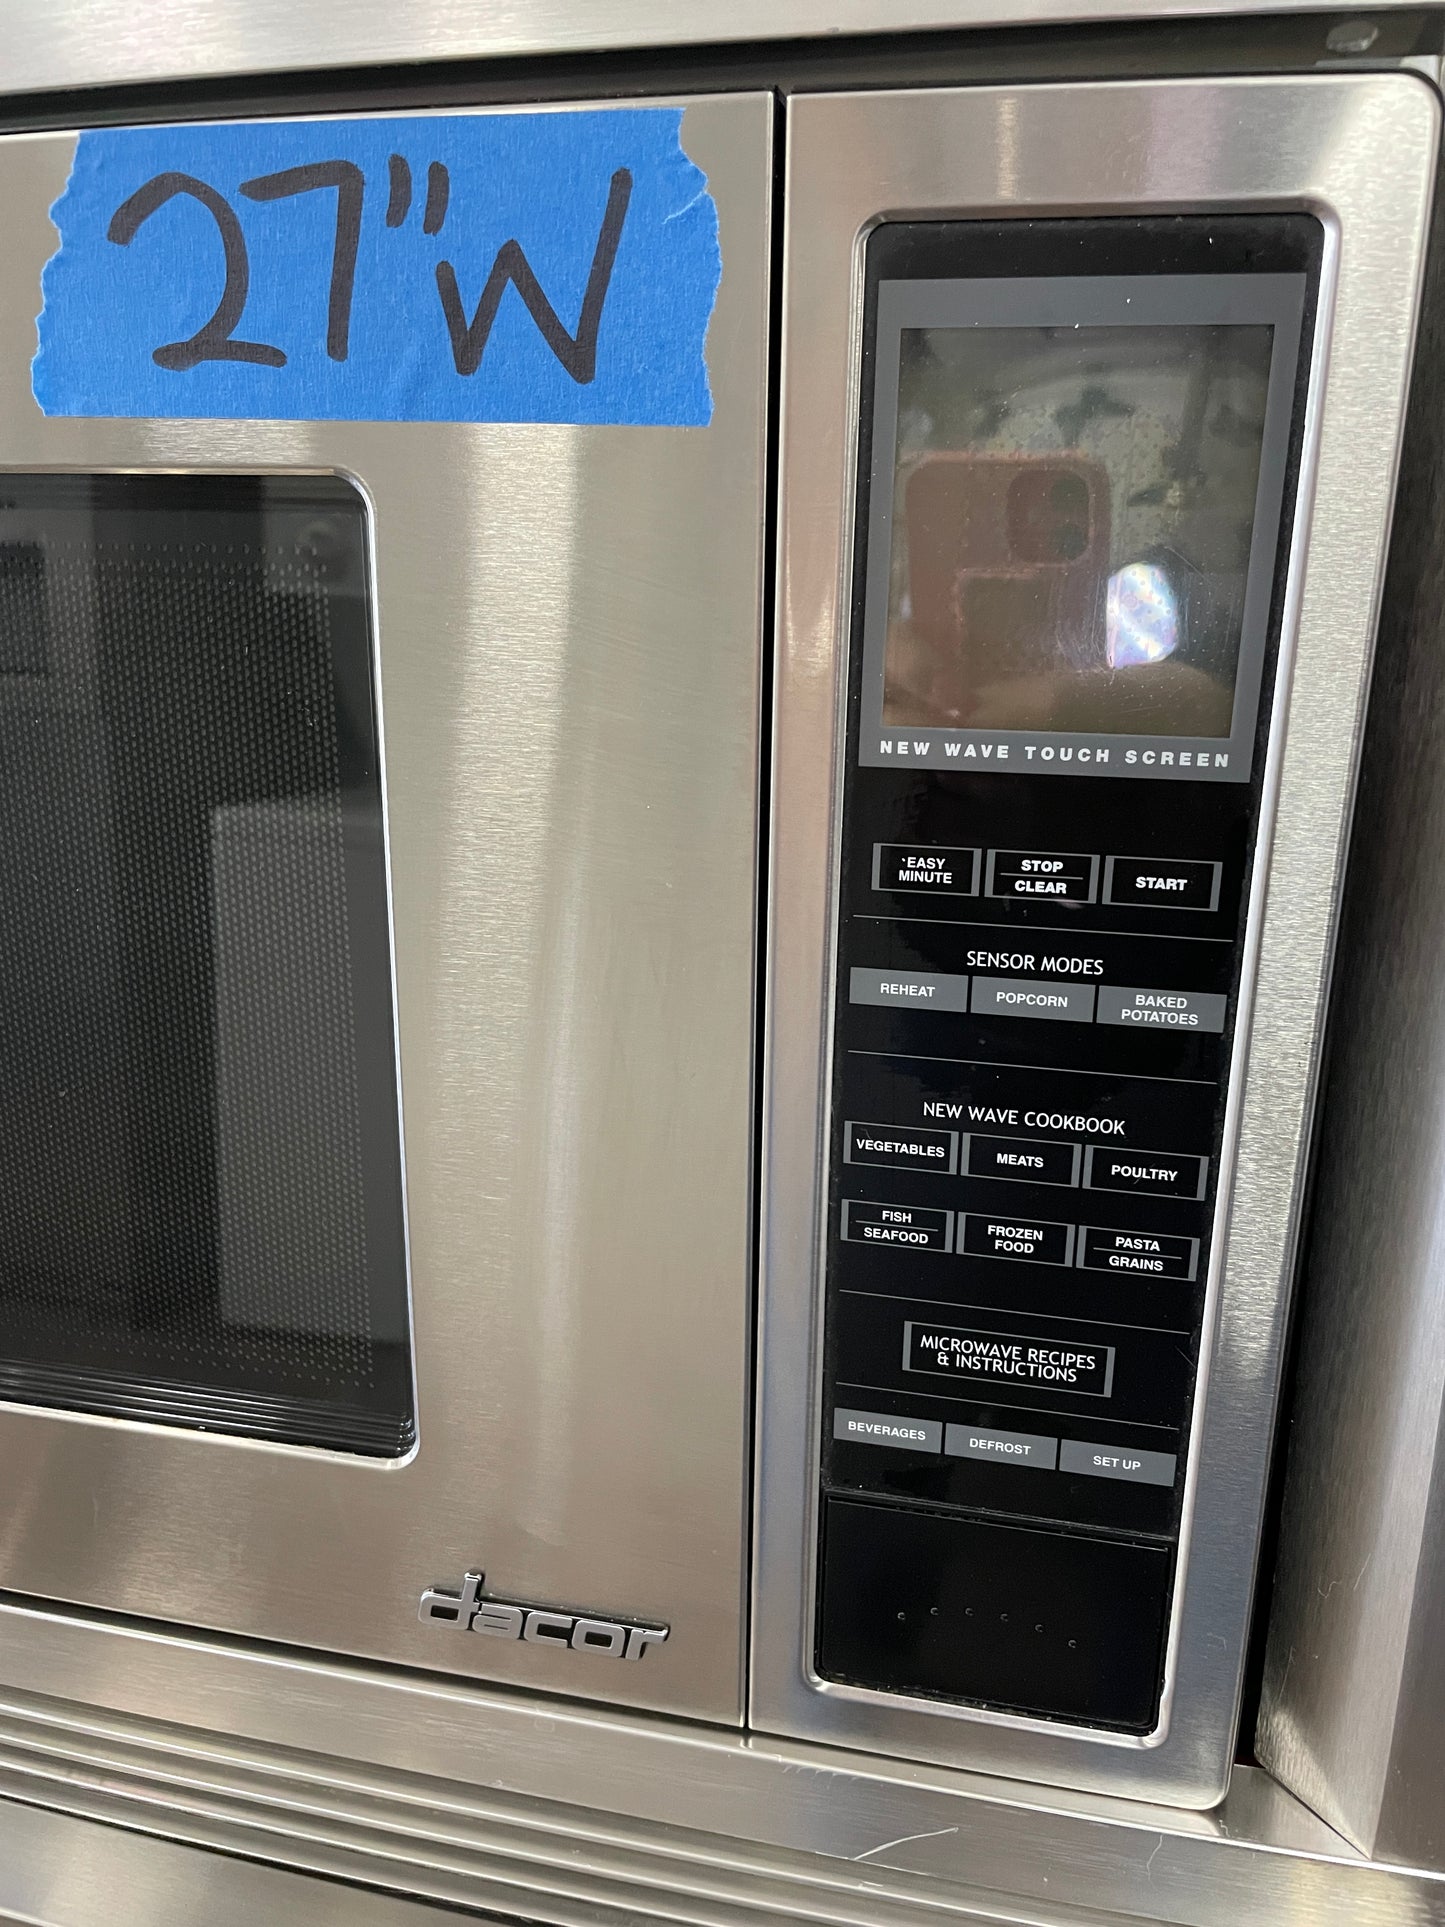 Dacor 27 Inch Electric Wall Oven Microwave Combo In Stainless Steel, RARE TO FIND , 999757